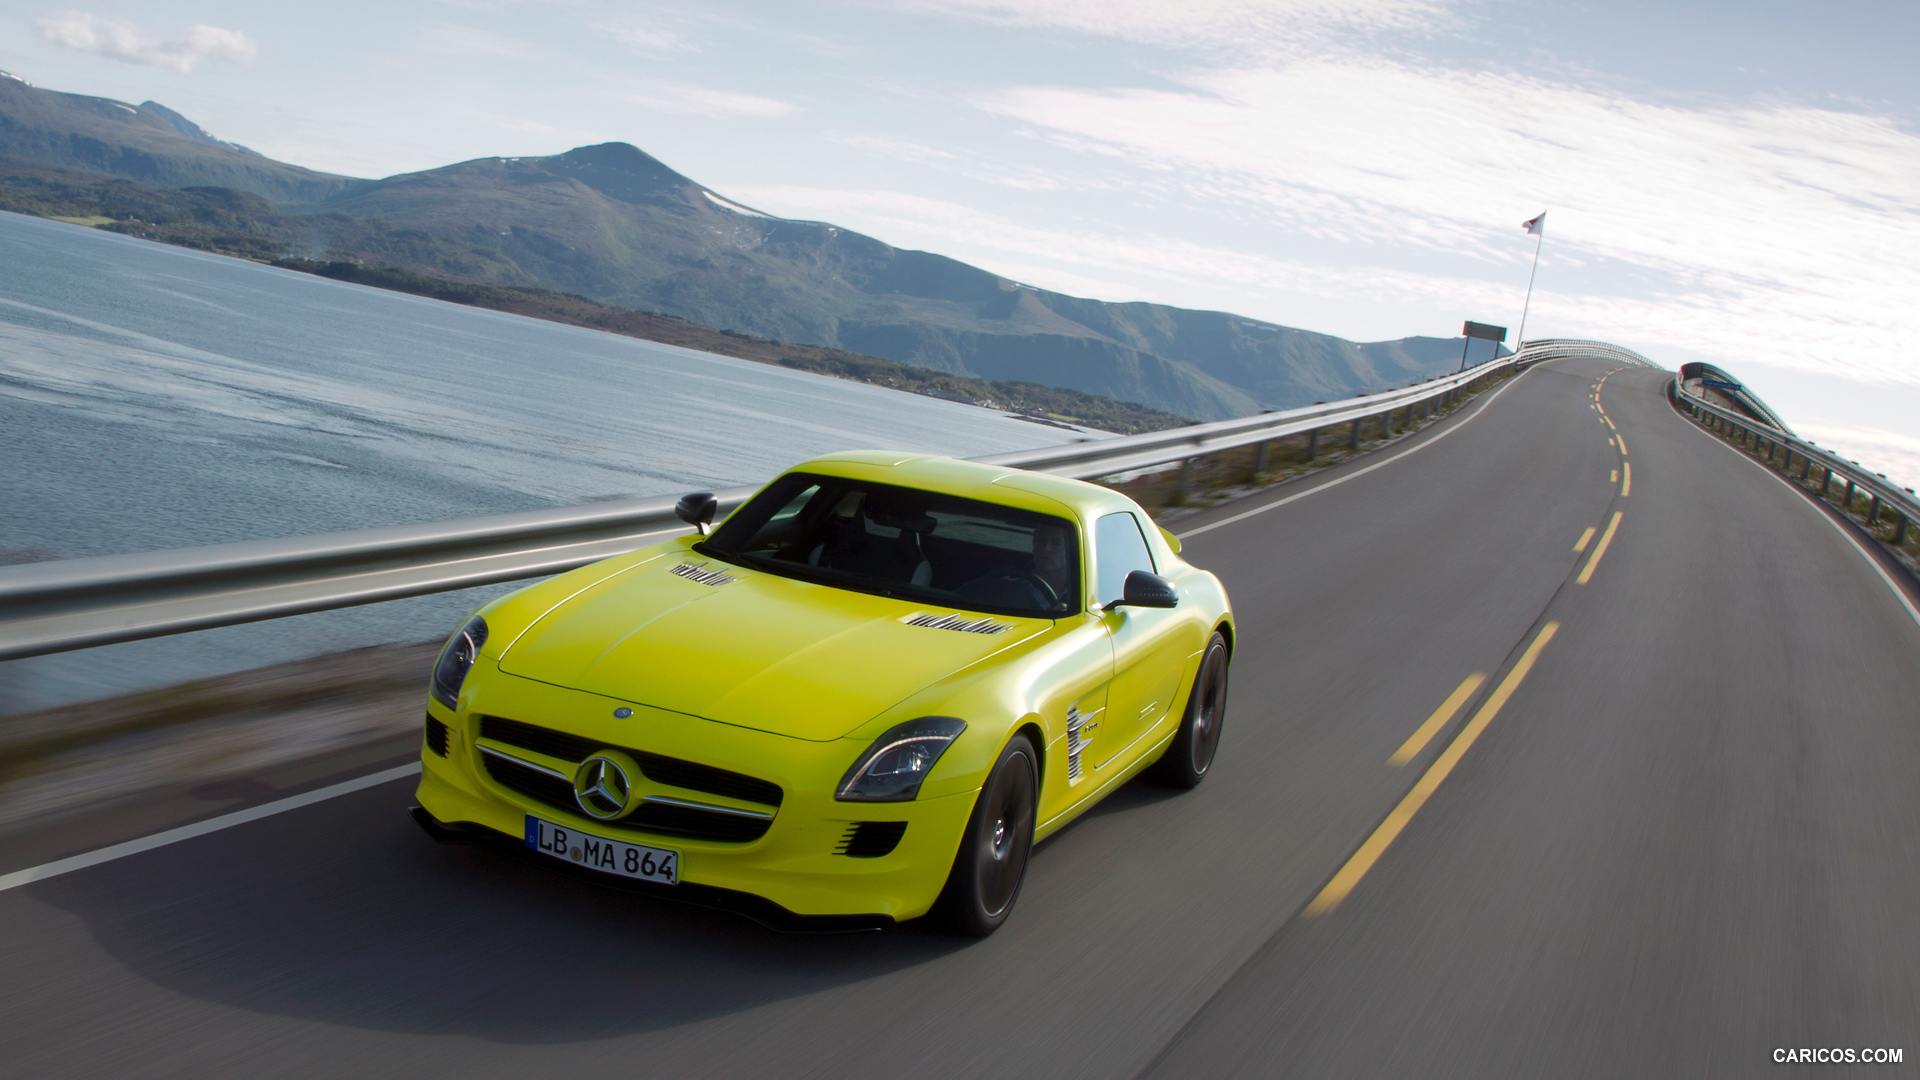 Mercedes-Benz SLS AMG E-CELL Concept  - Front, #32 of 60